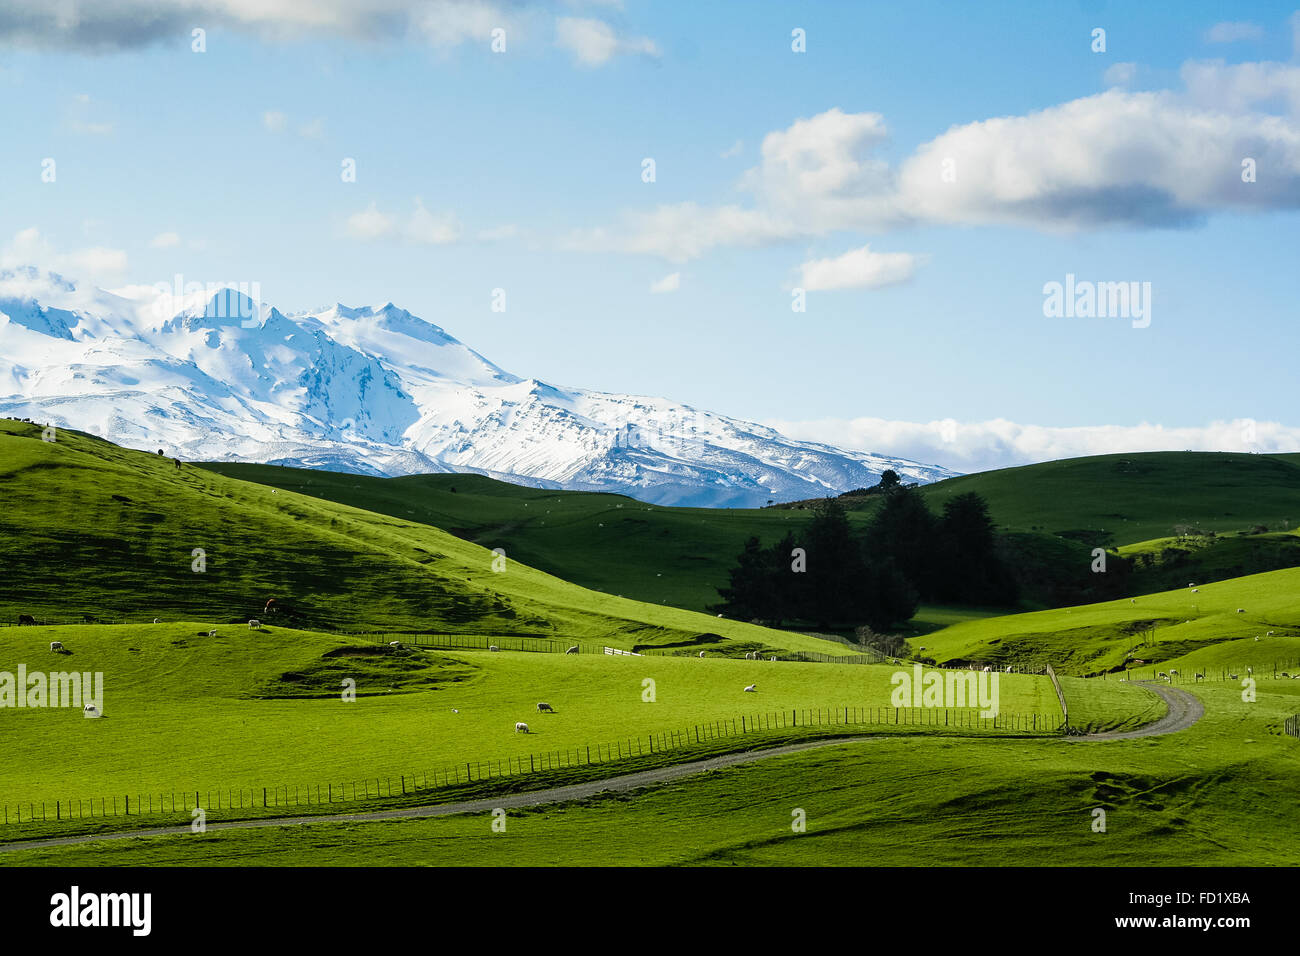 New Zealand. Spectacular mountain scenery with rolling green hills in the foreground. Stock Photo